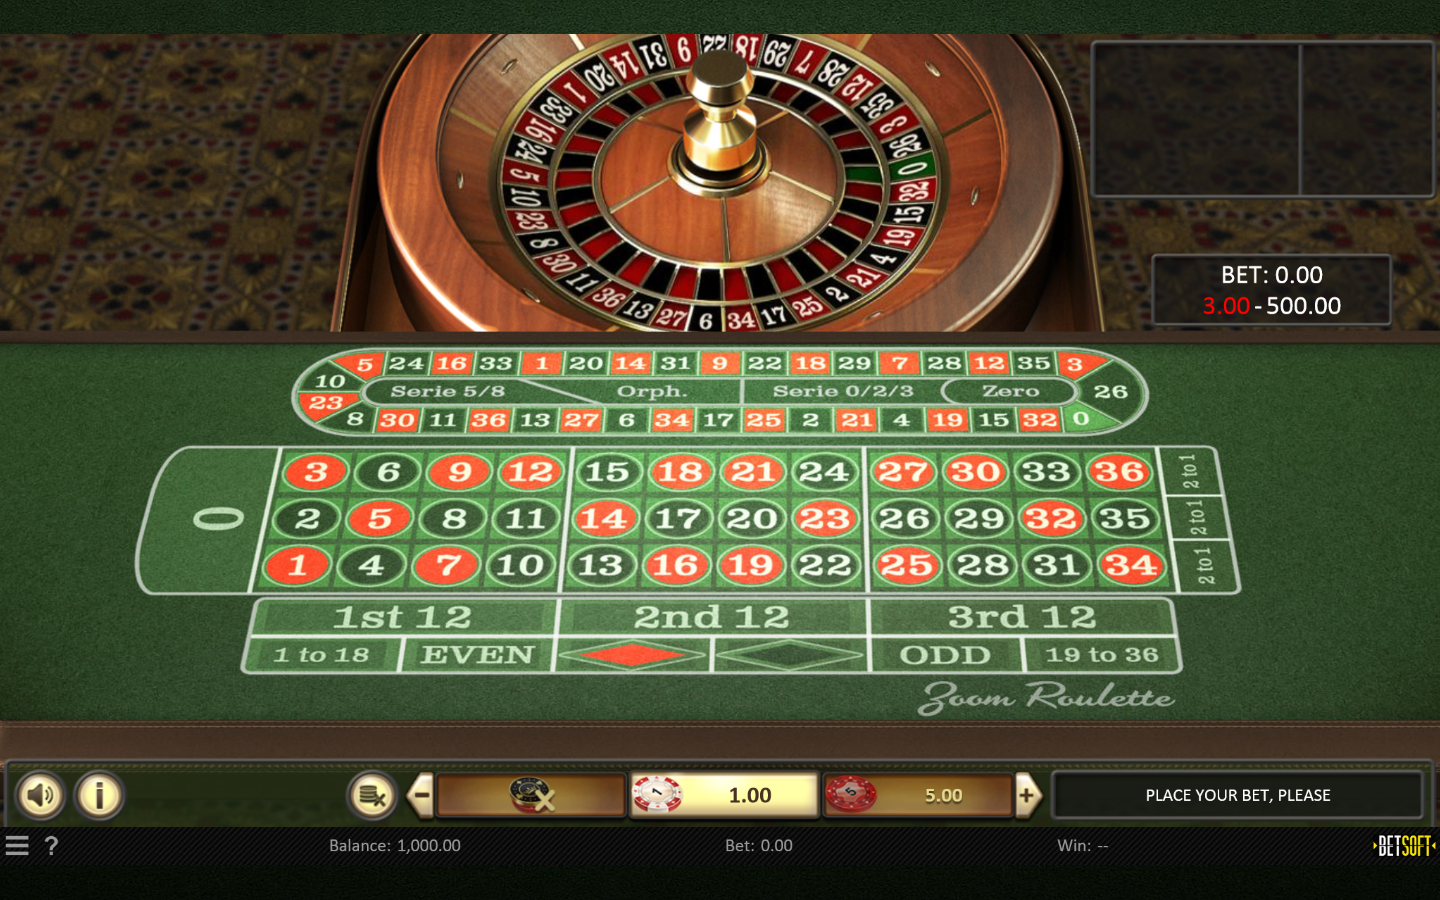 Zoom Roulette with Special Bets